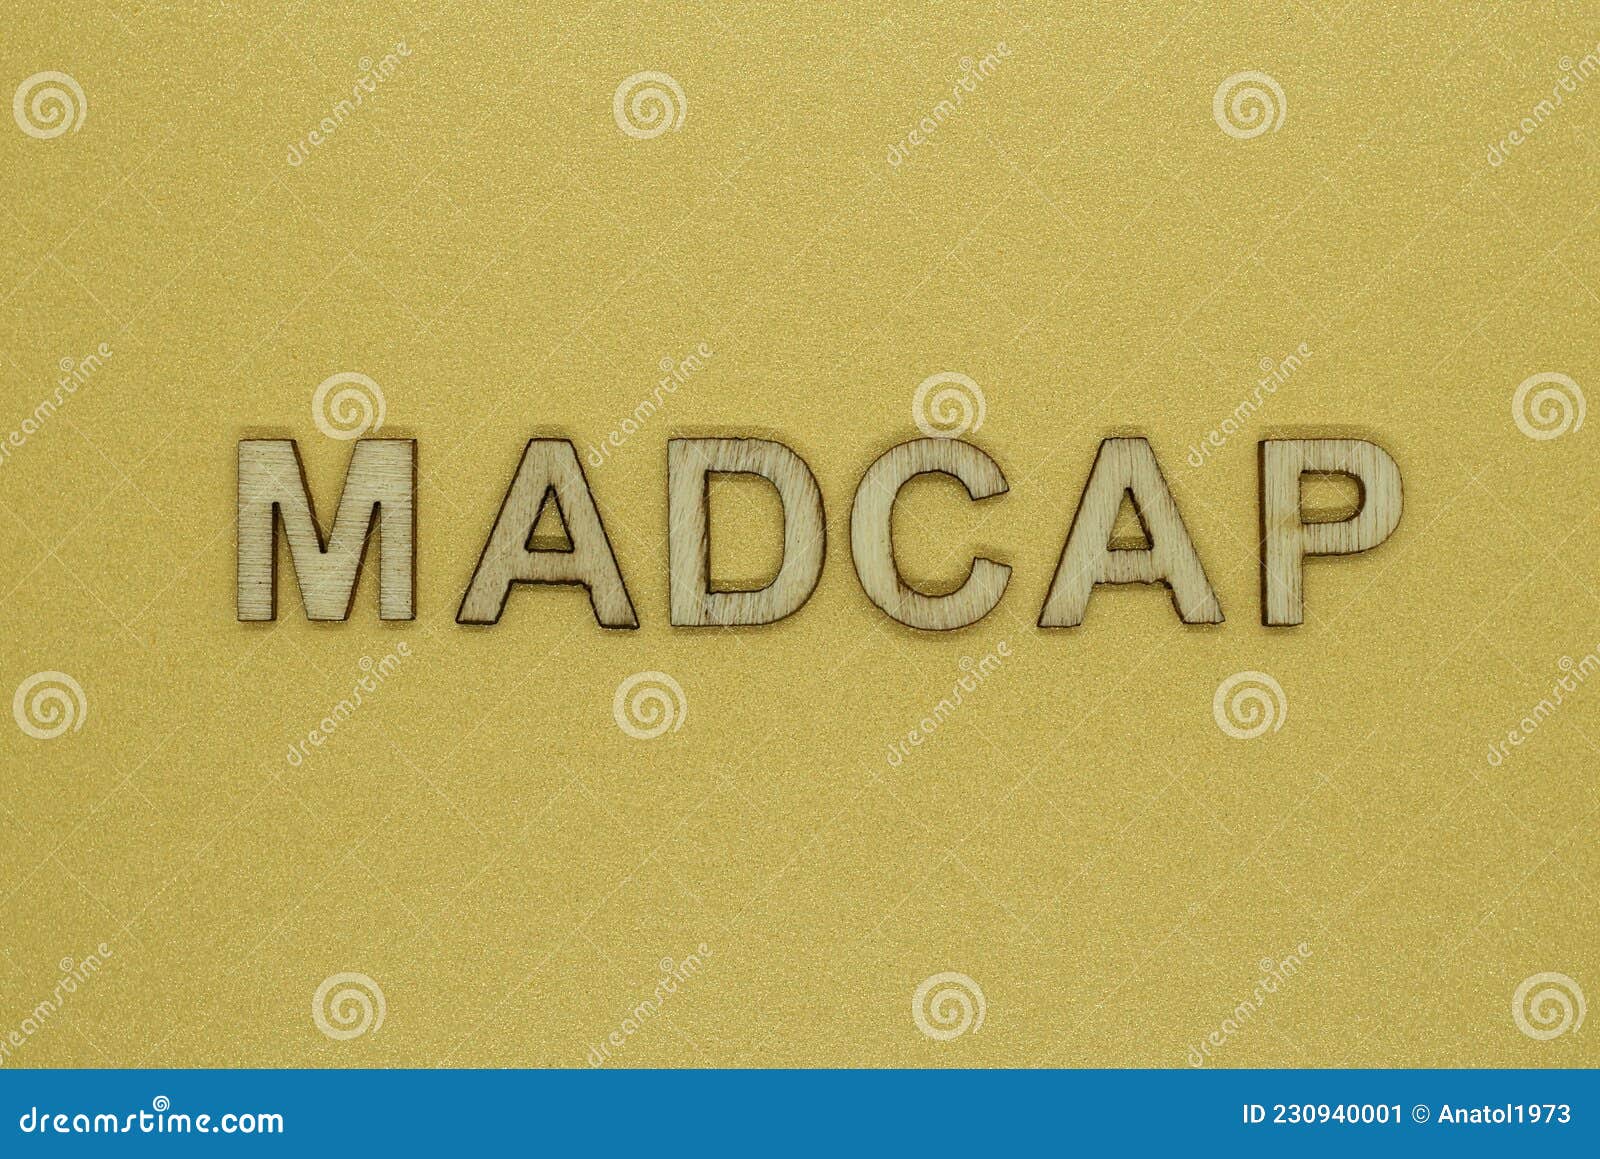 word madcap made from wooden letters